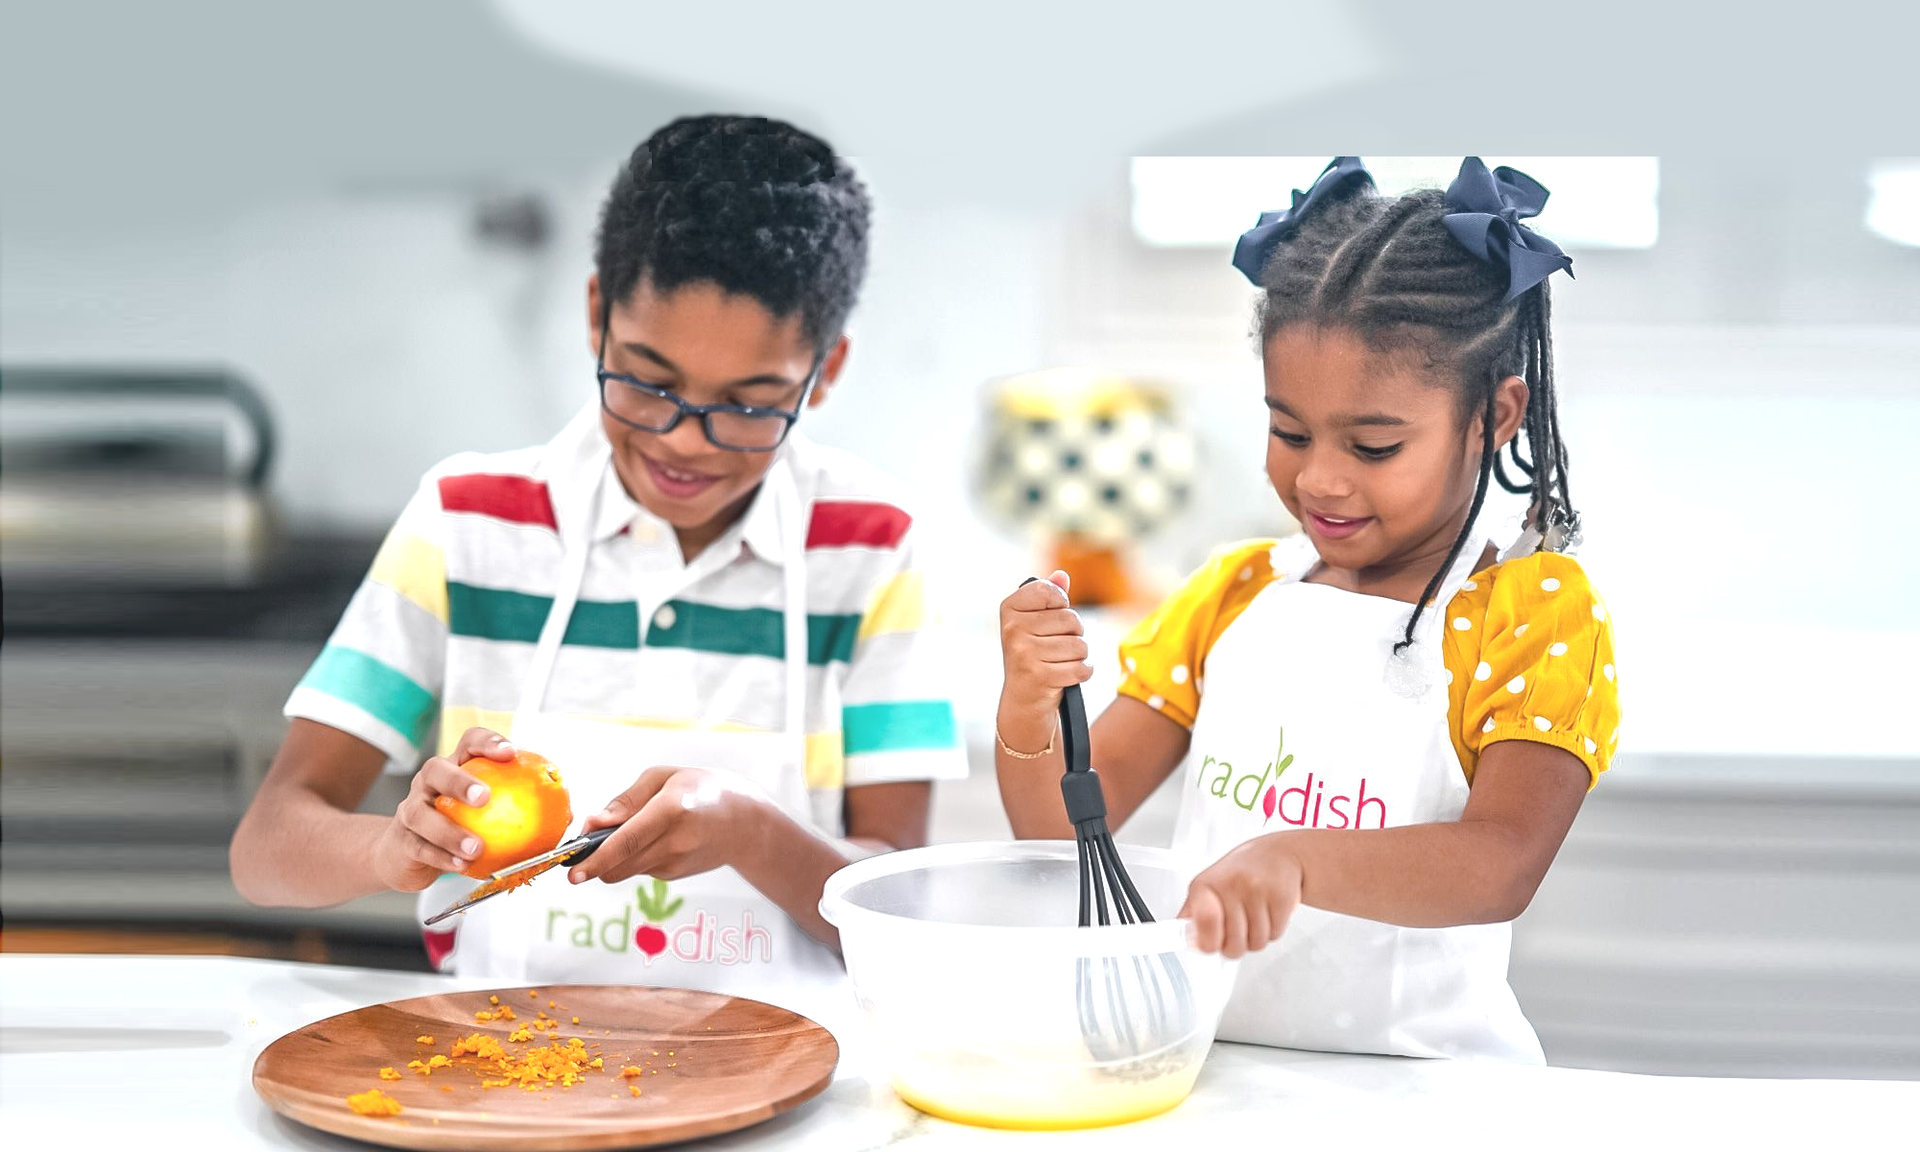 Raddish Kids Teacher Discount | Education Discount on Kids Cooking & Baking Kits | Kids Cooking Subscriptions